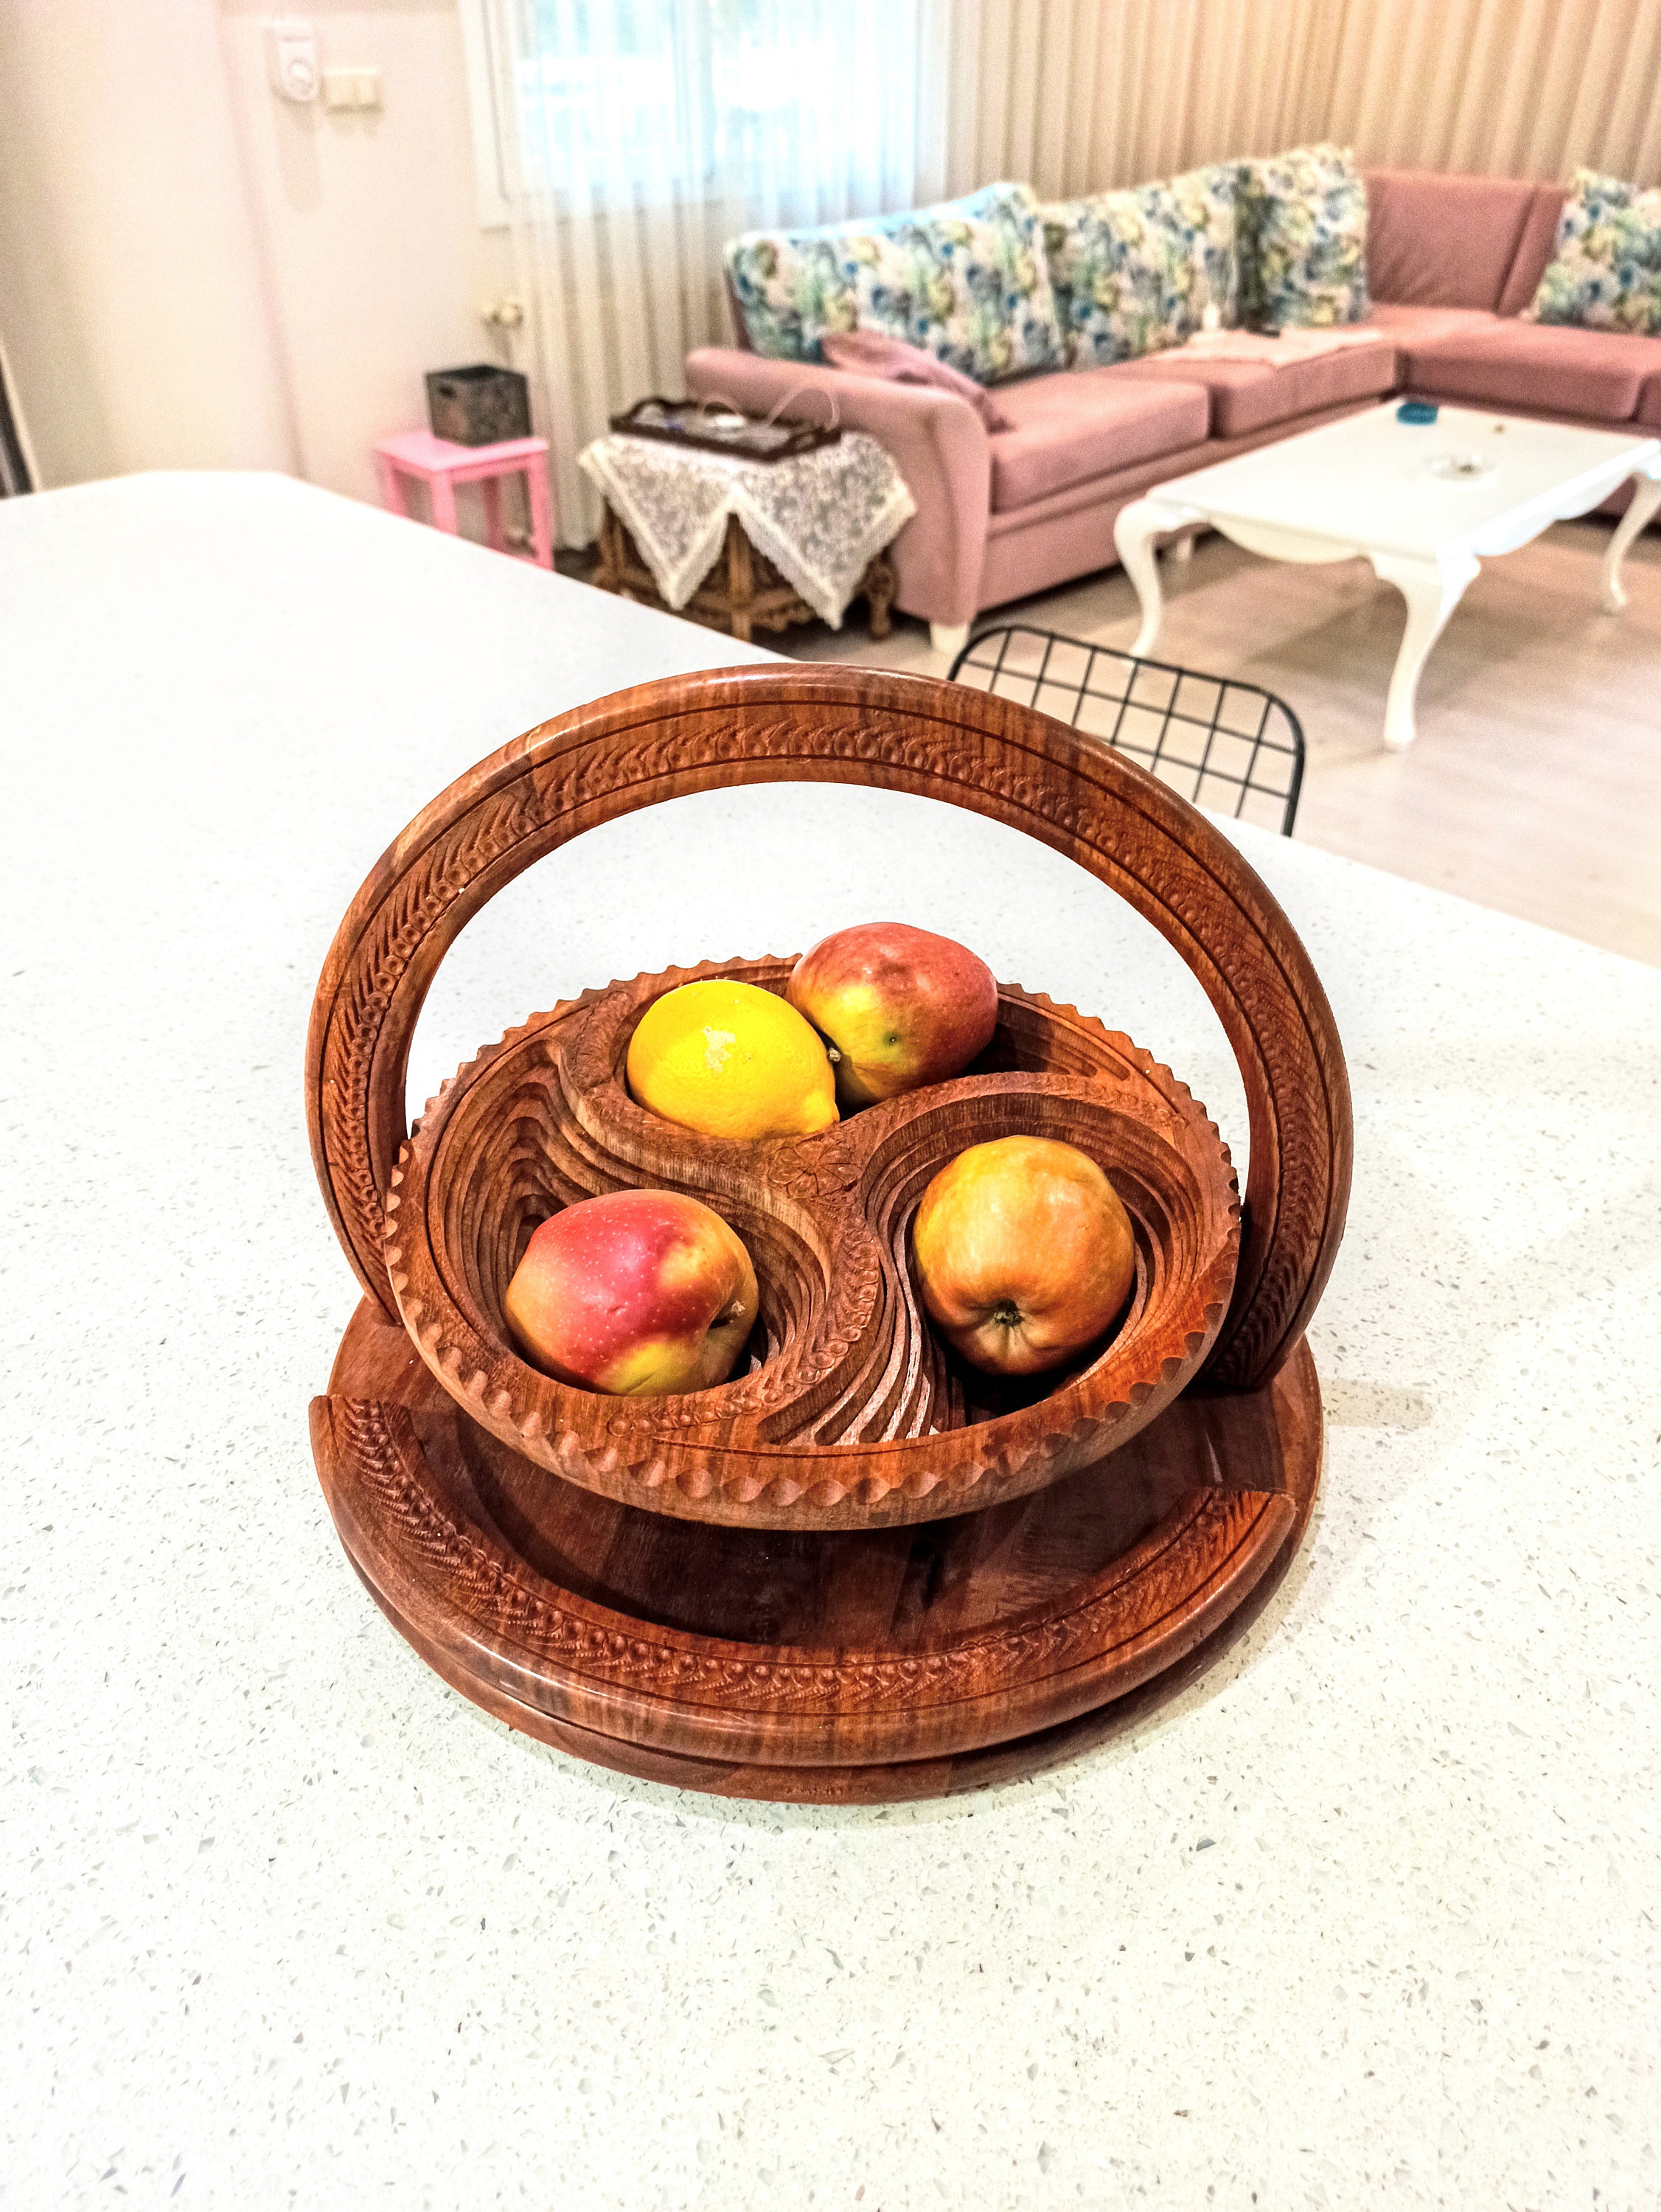 Collapsing Basket With Handle, Wood Fruit Bowl, Personalized Bowl, Wooden  Basket, Gift for Mom, Wooden Trivet 